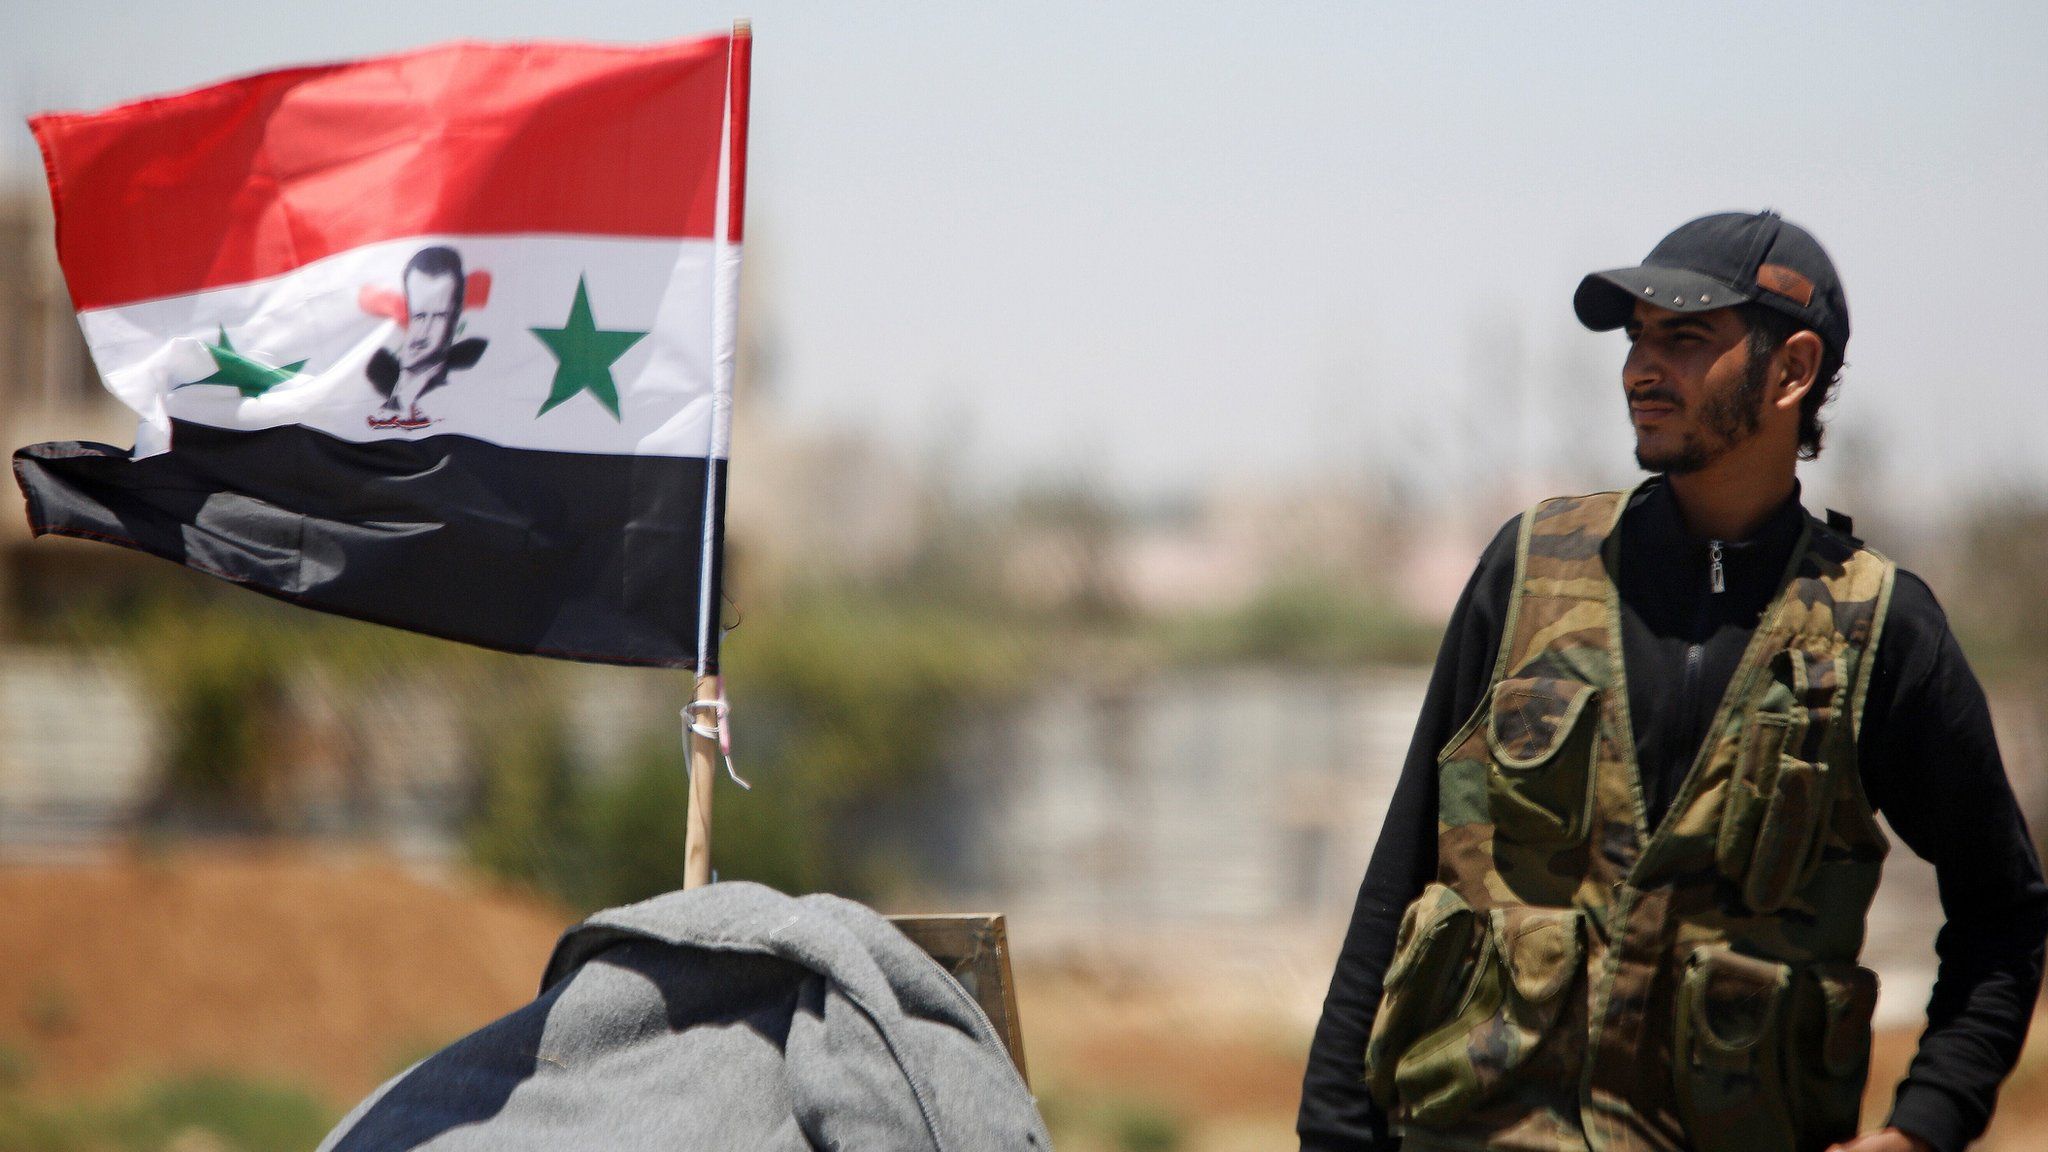 A Syrian army soldier stands next to a Syrian flag in Umm al-Mayazen, in the Deraa countryside, Syria (10 July 2018)